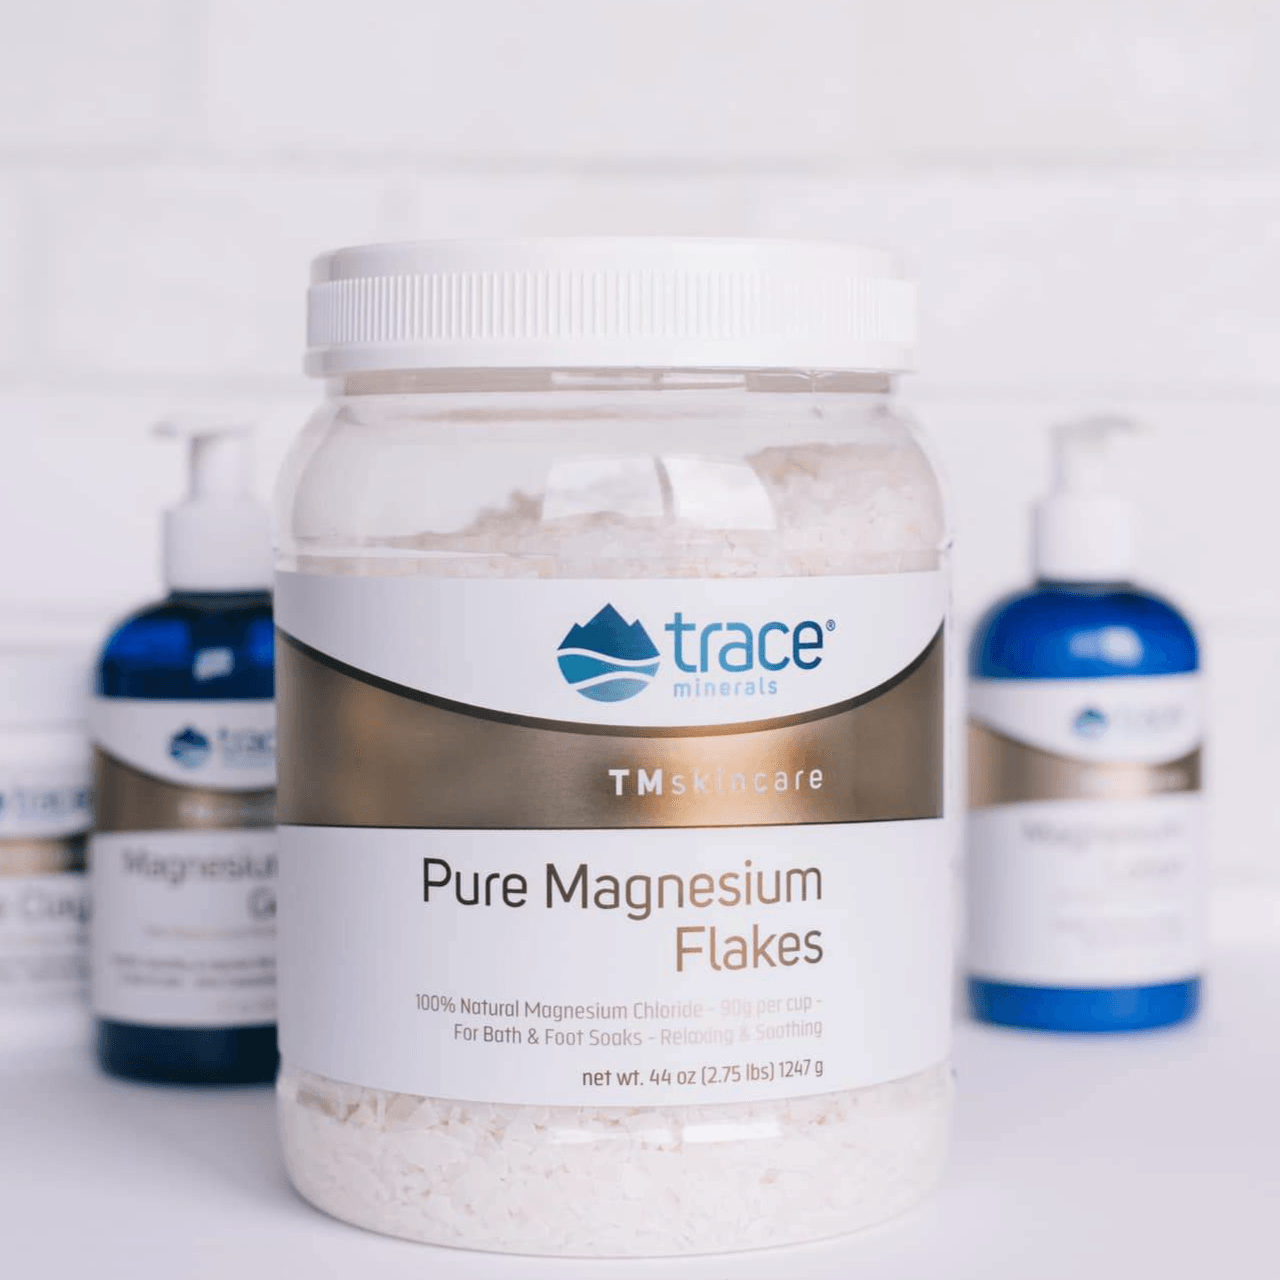 TMSkincare Pure Magnesium Flakes - Trace Minerals